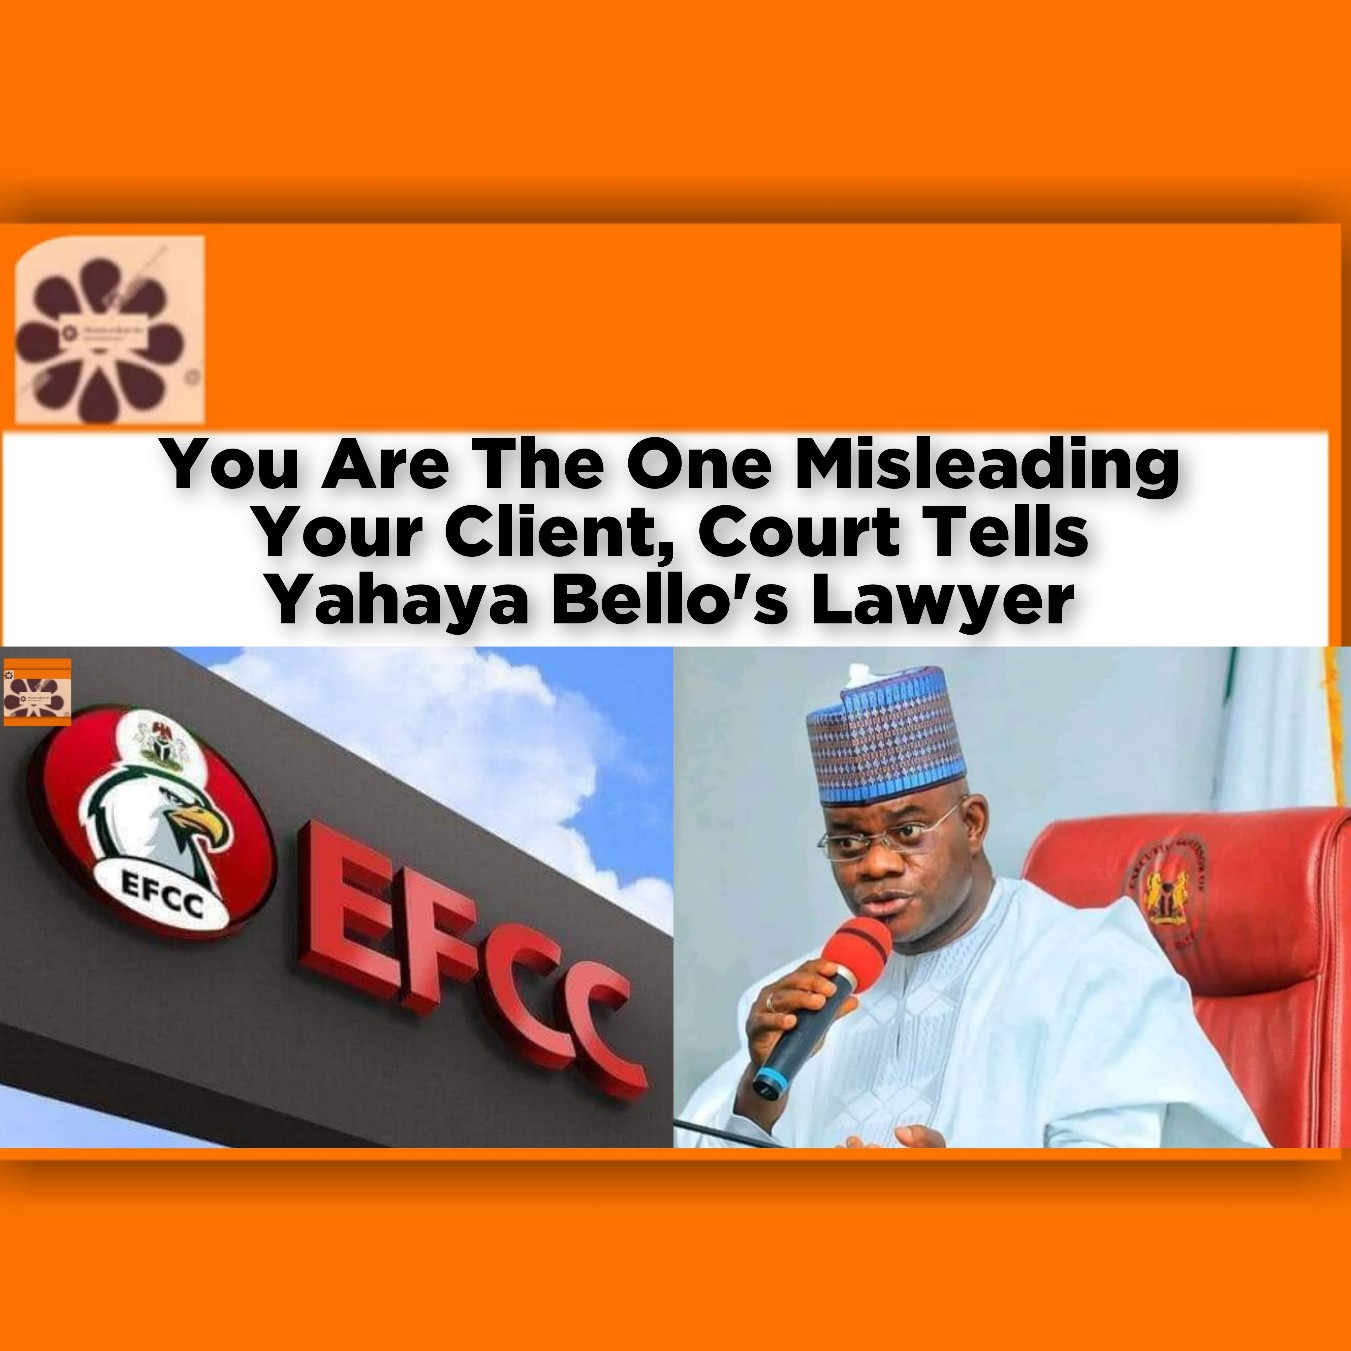 You Are The One Misleading Your Client, Court Tells Yahaya Bello's Lawyer ~ OsazuwaAkonedo #Goodwin